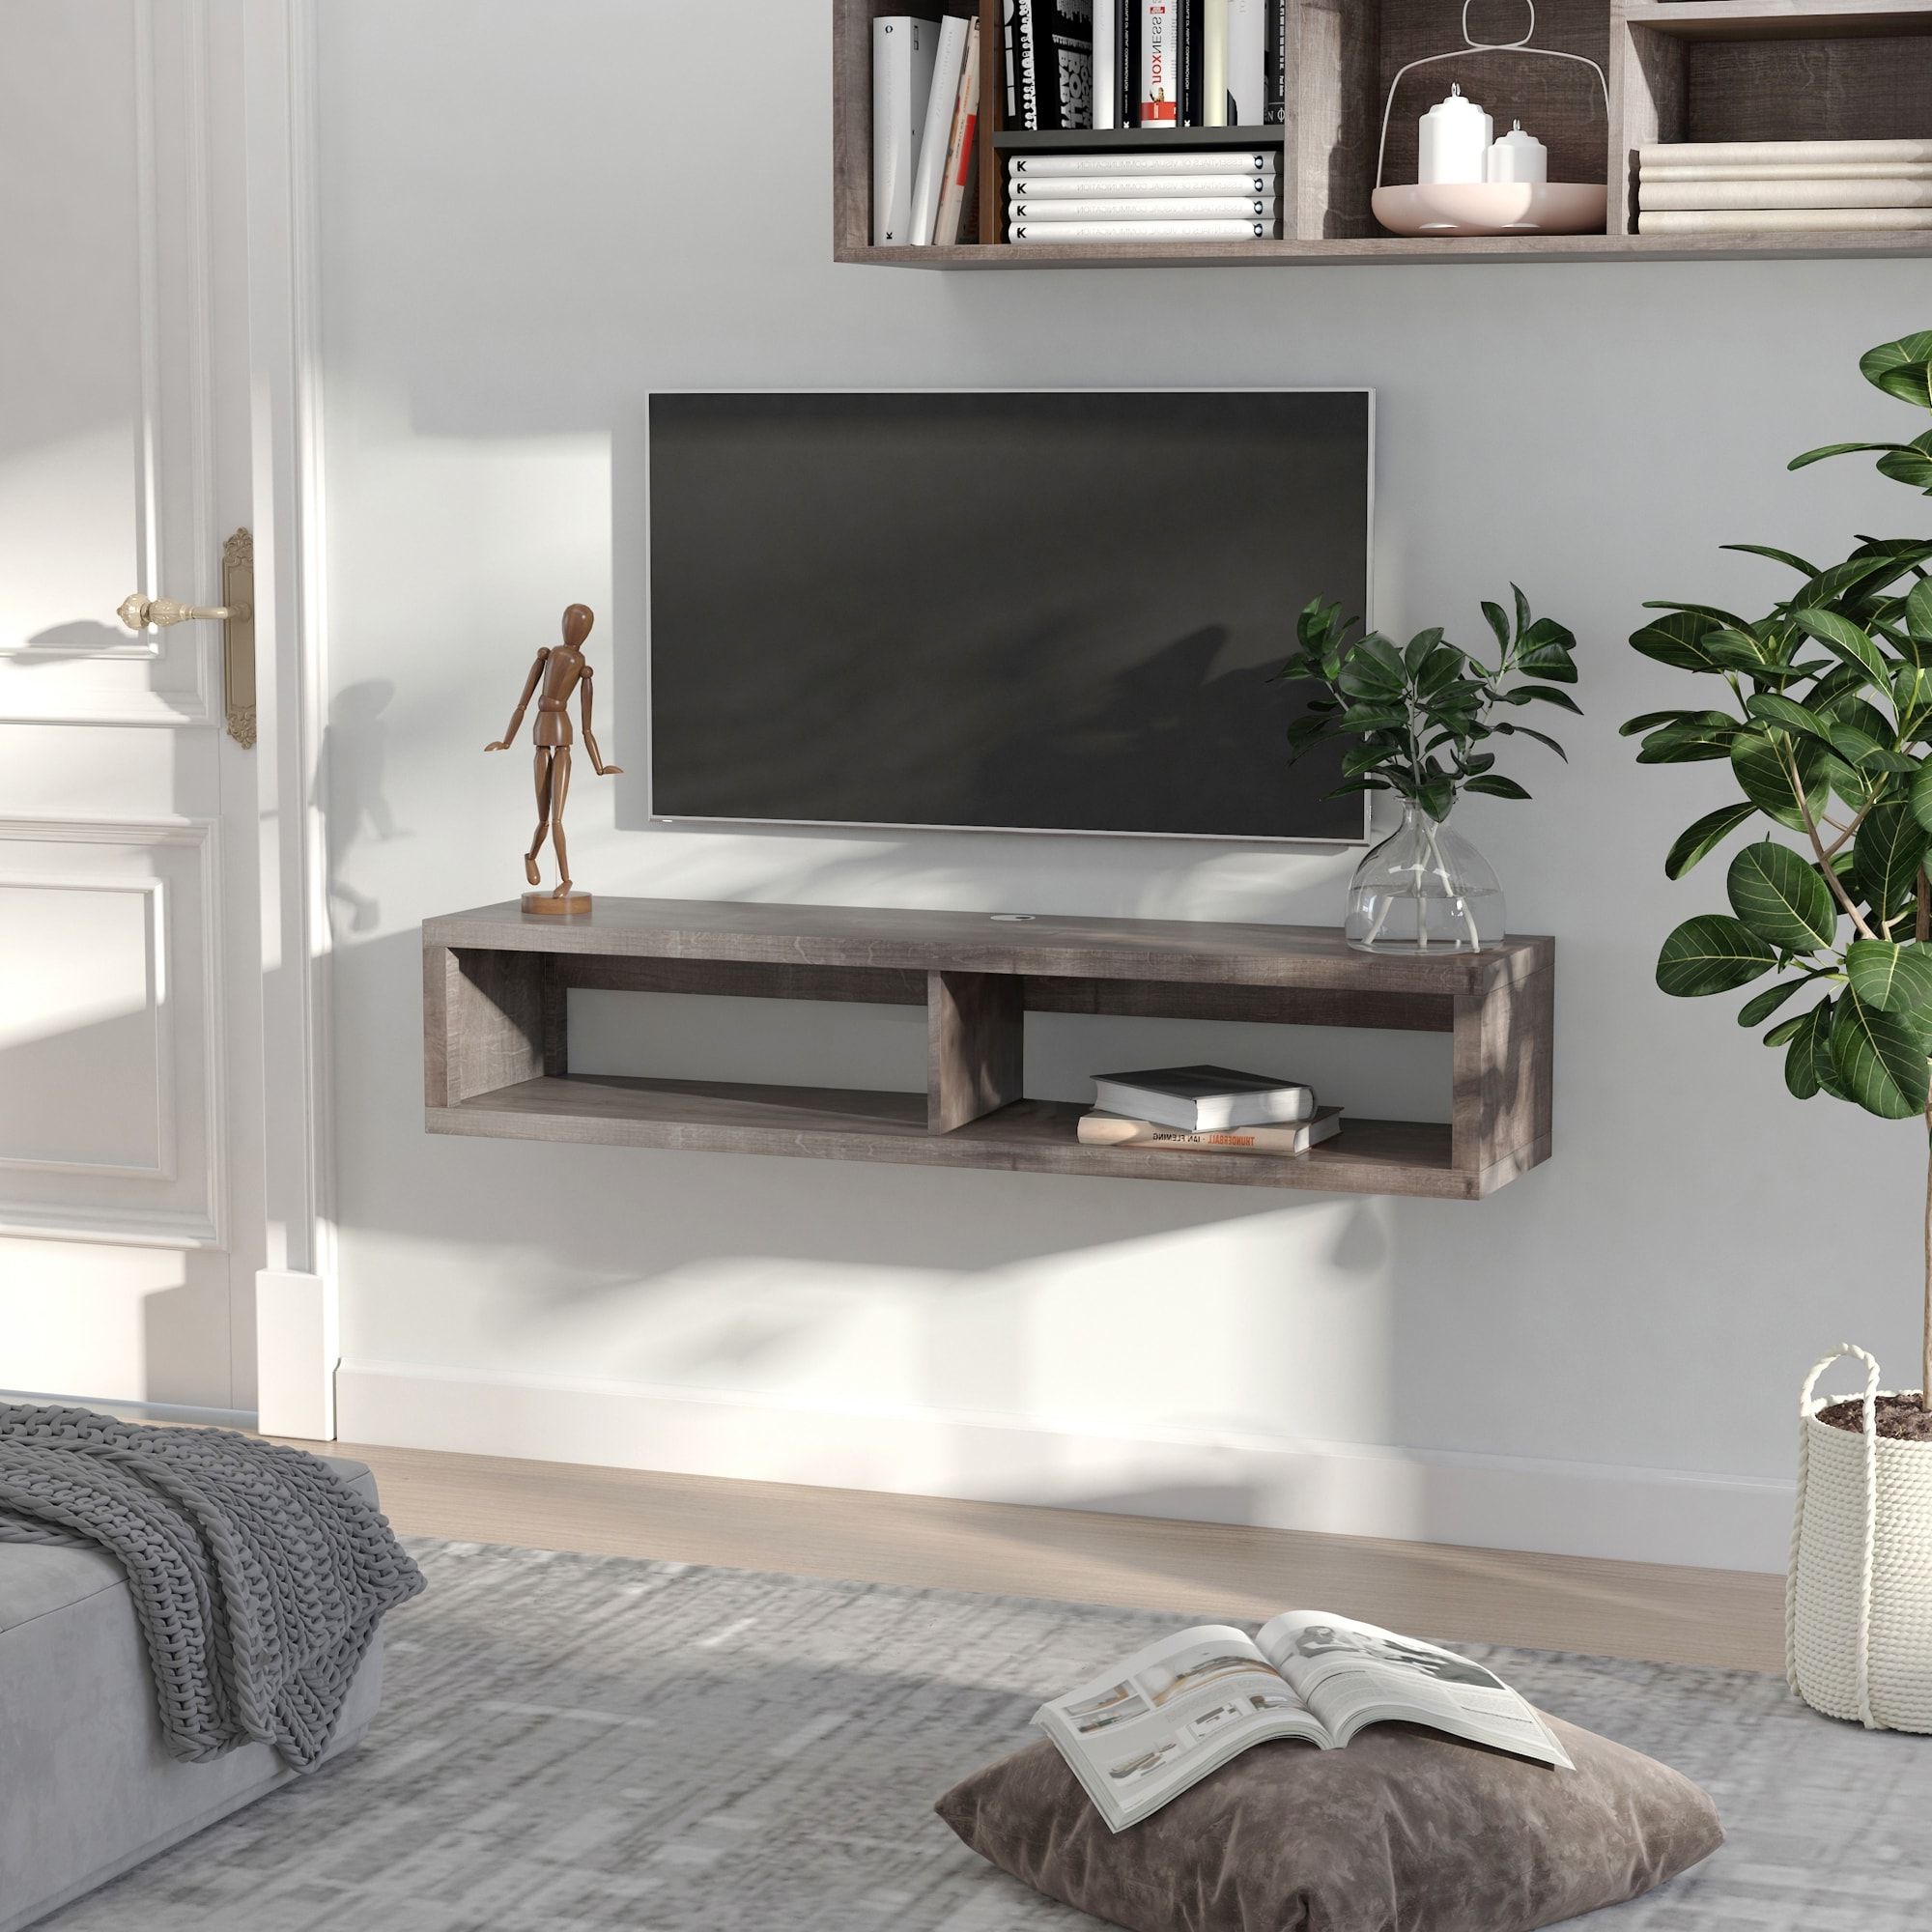 Homcom Wall Mounted Media Console, Floating Tv Stand Component Shelf, Entertainment  Center Unit, Dark Grey Wood Grain – On Sale – Bed Bath & Beyond – 32941209 Inside Wall Mounted Floating Tv Stands (View 18 of 20)